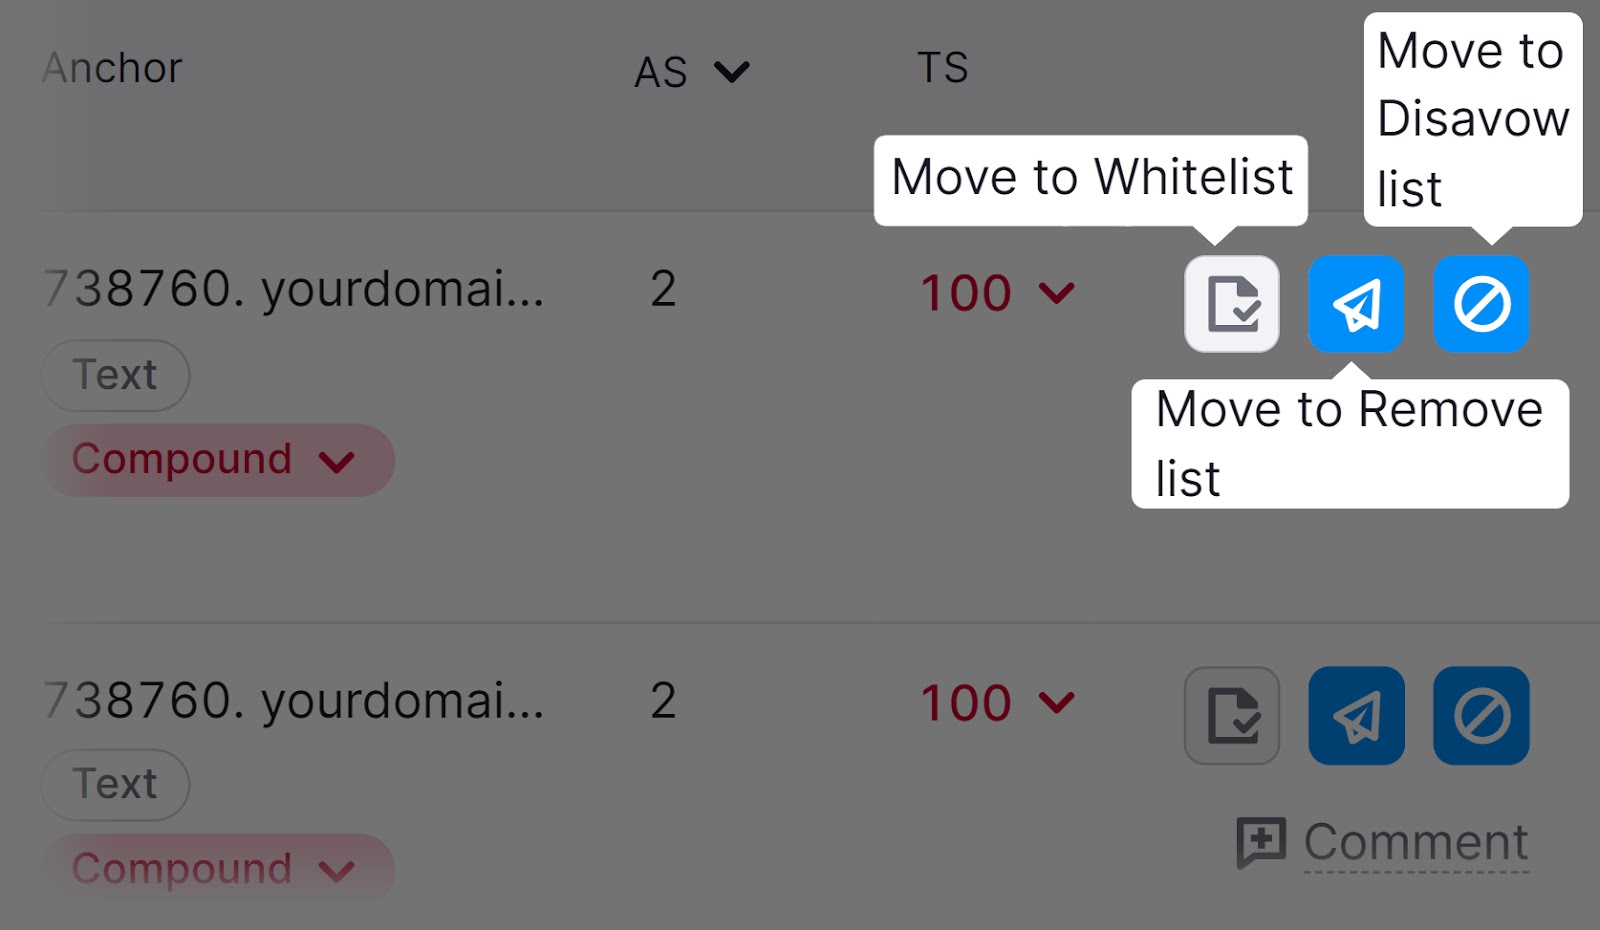 “Move to Whitelist,” “Move to Remove list,” and “Move to Disavow list” icons highlighted